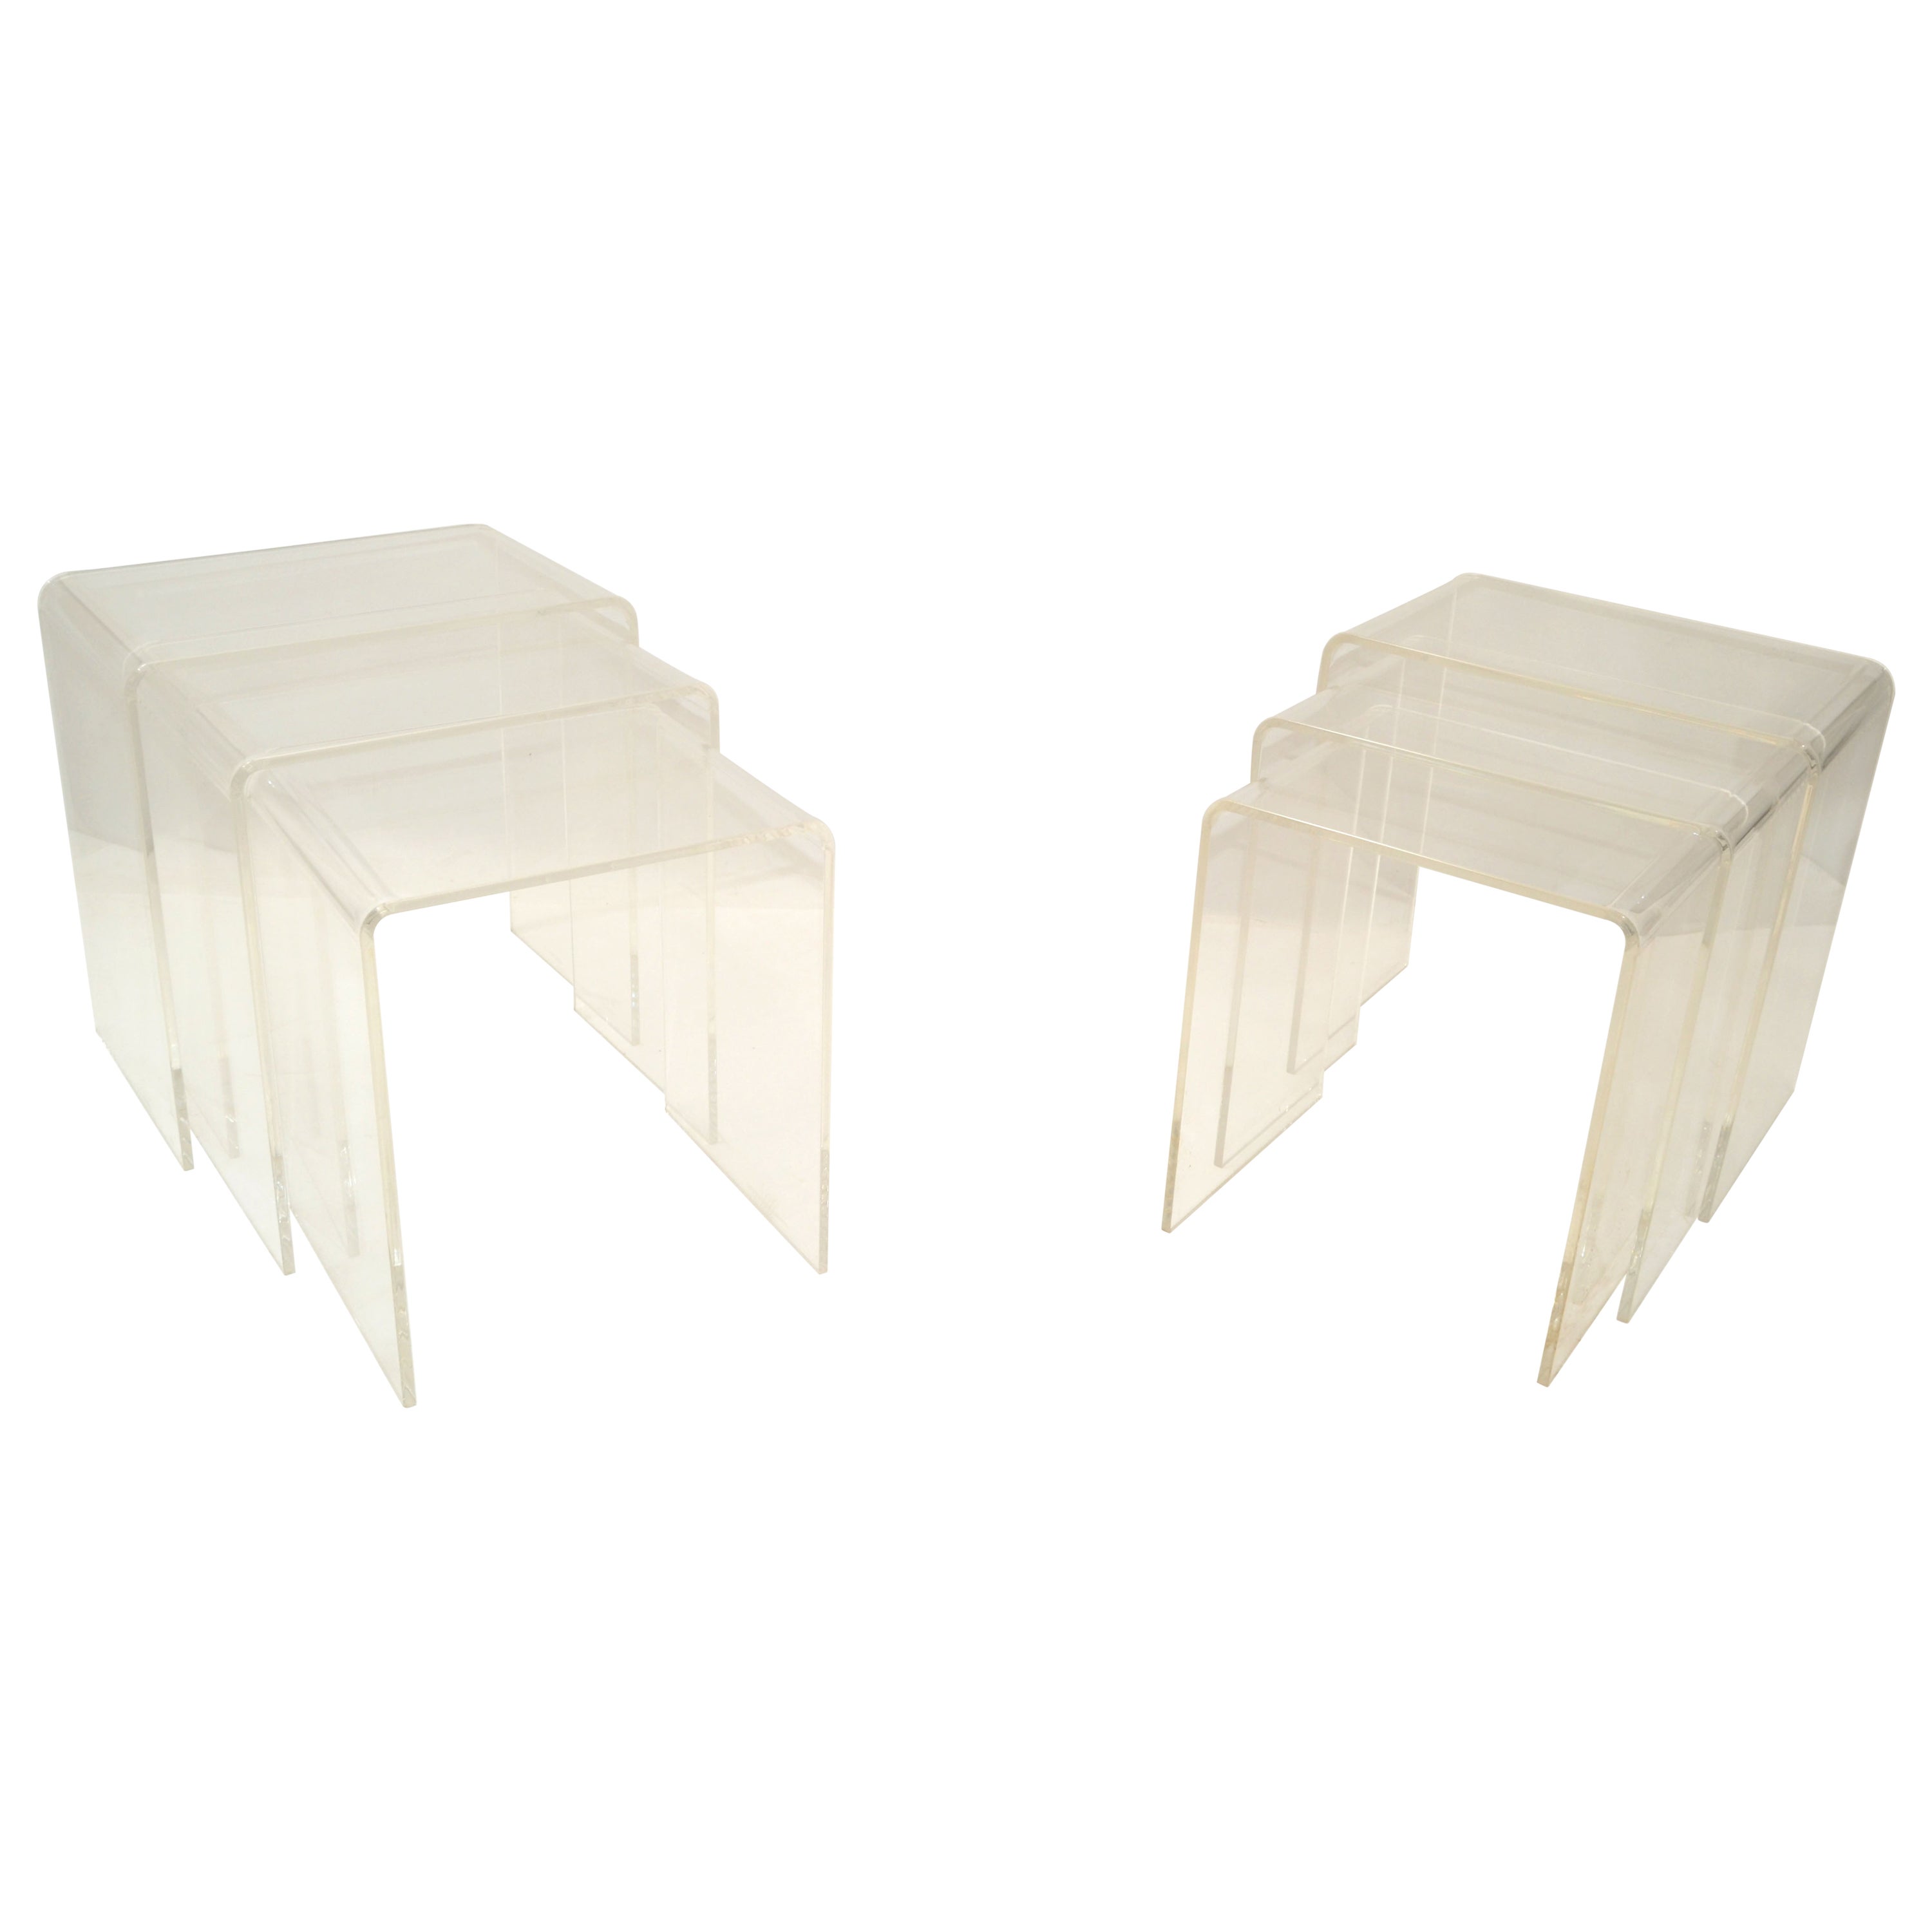 Pair of Lucite Waterfall Nesting Tables / Stacking Tables, Stools, Set of 3